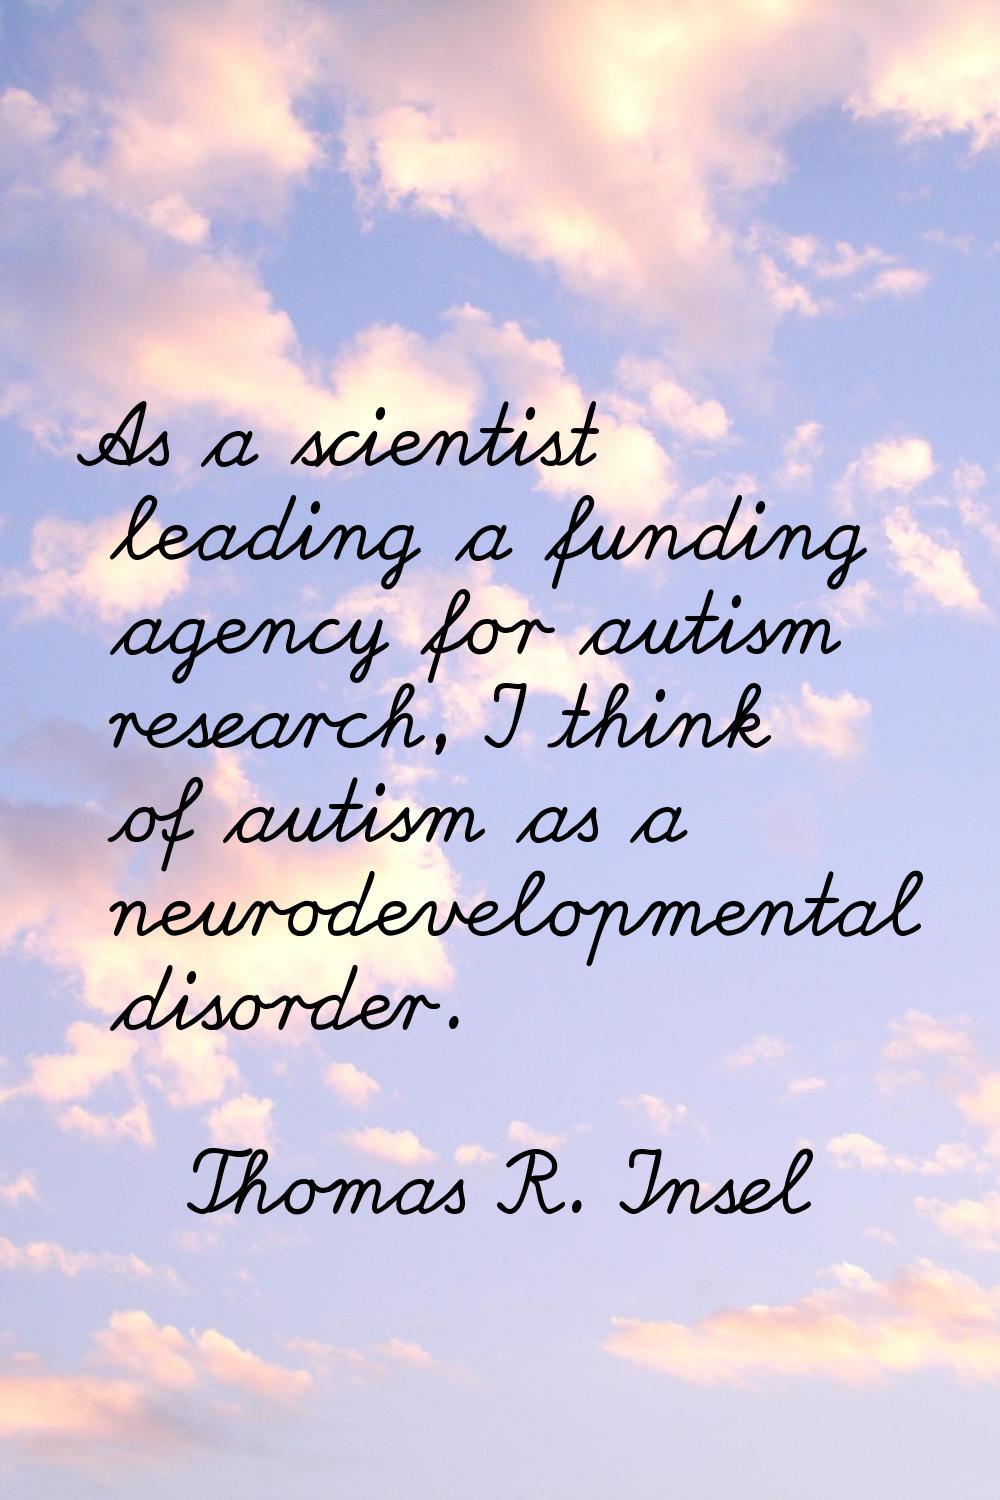 As a scientist leading a funding agency for autism research, I think of autism as a neurodevelopmen